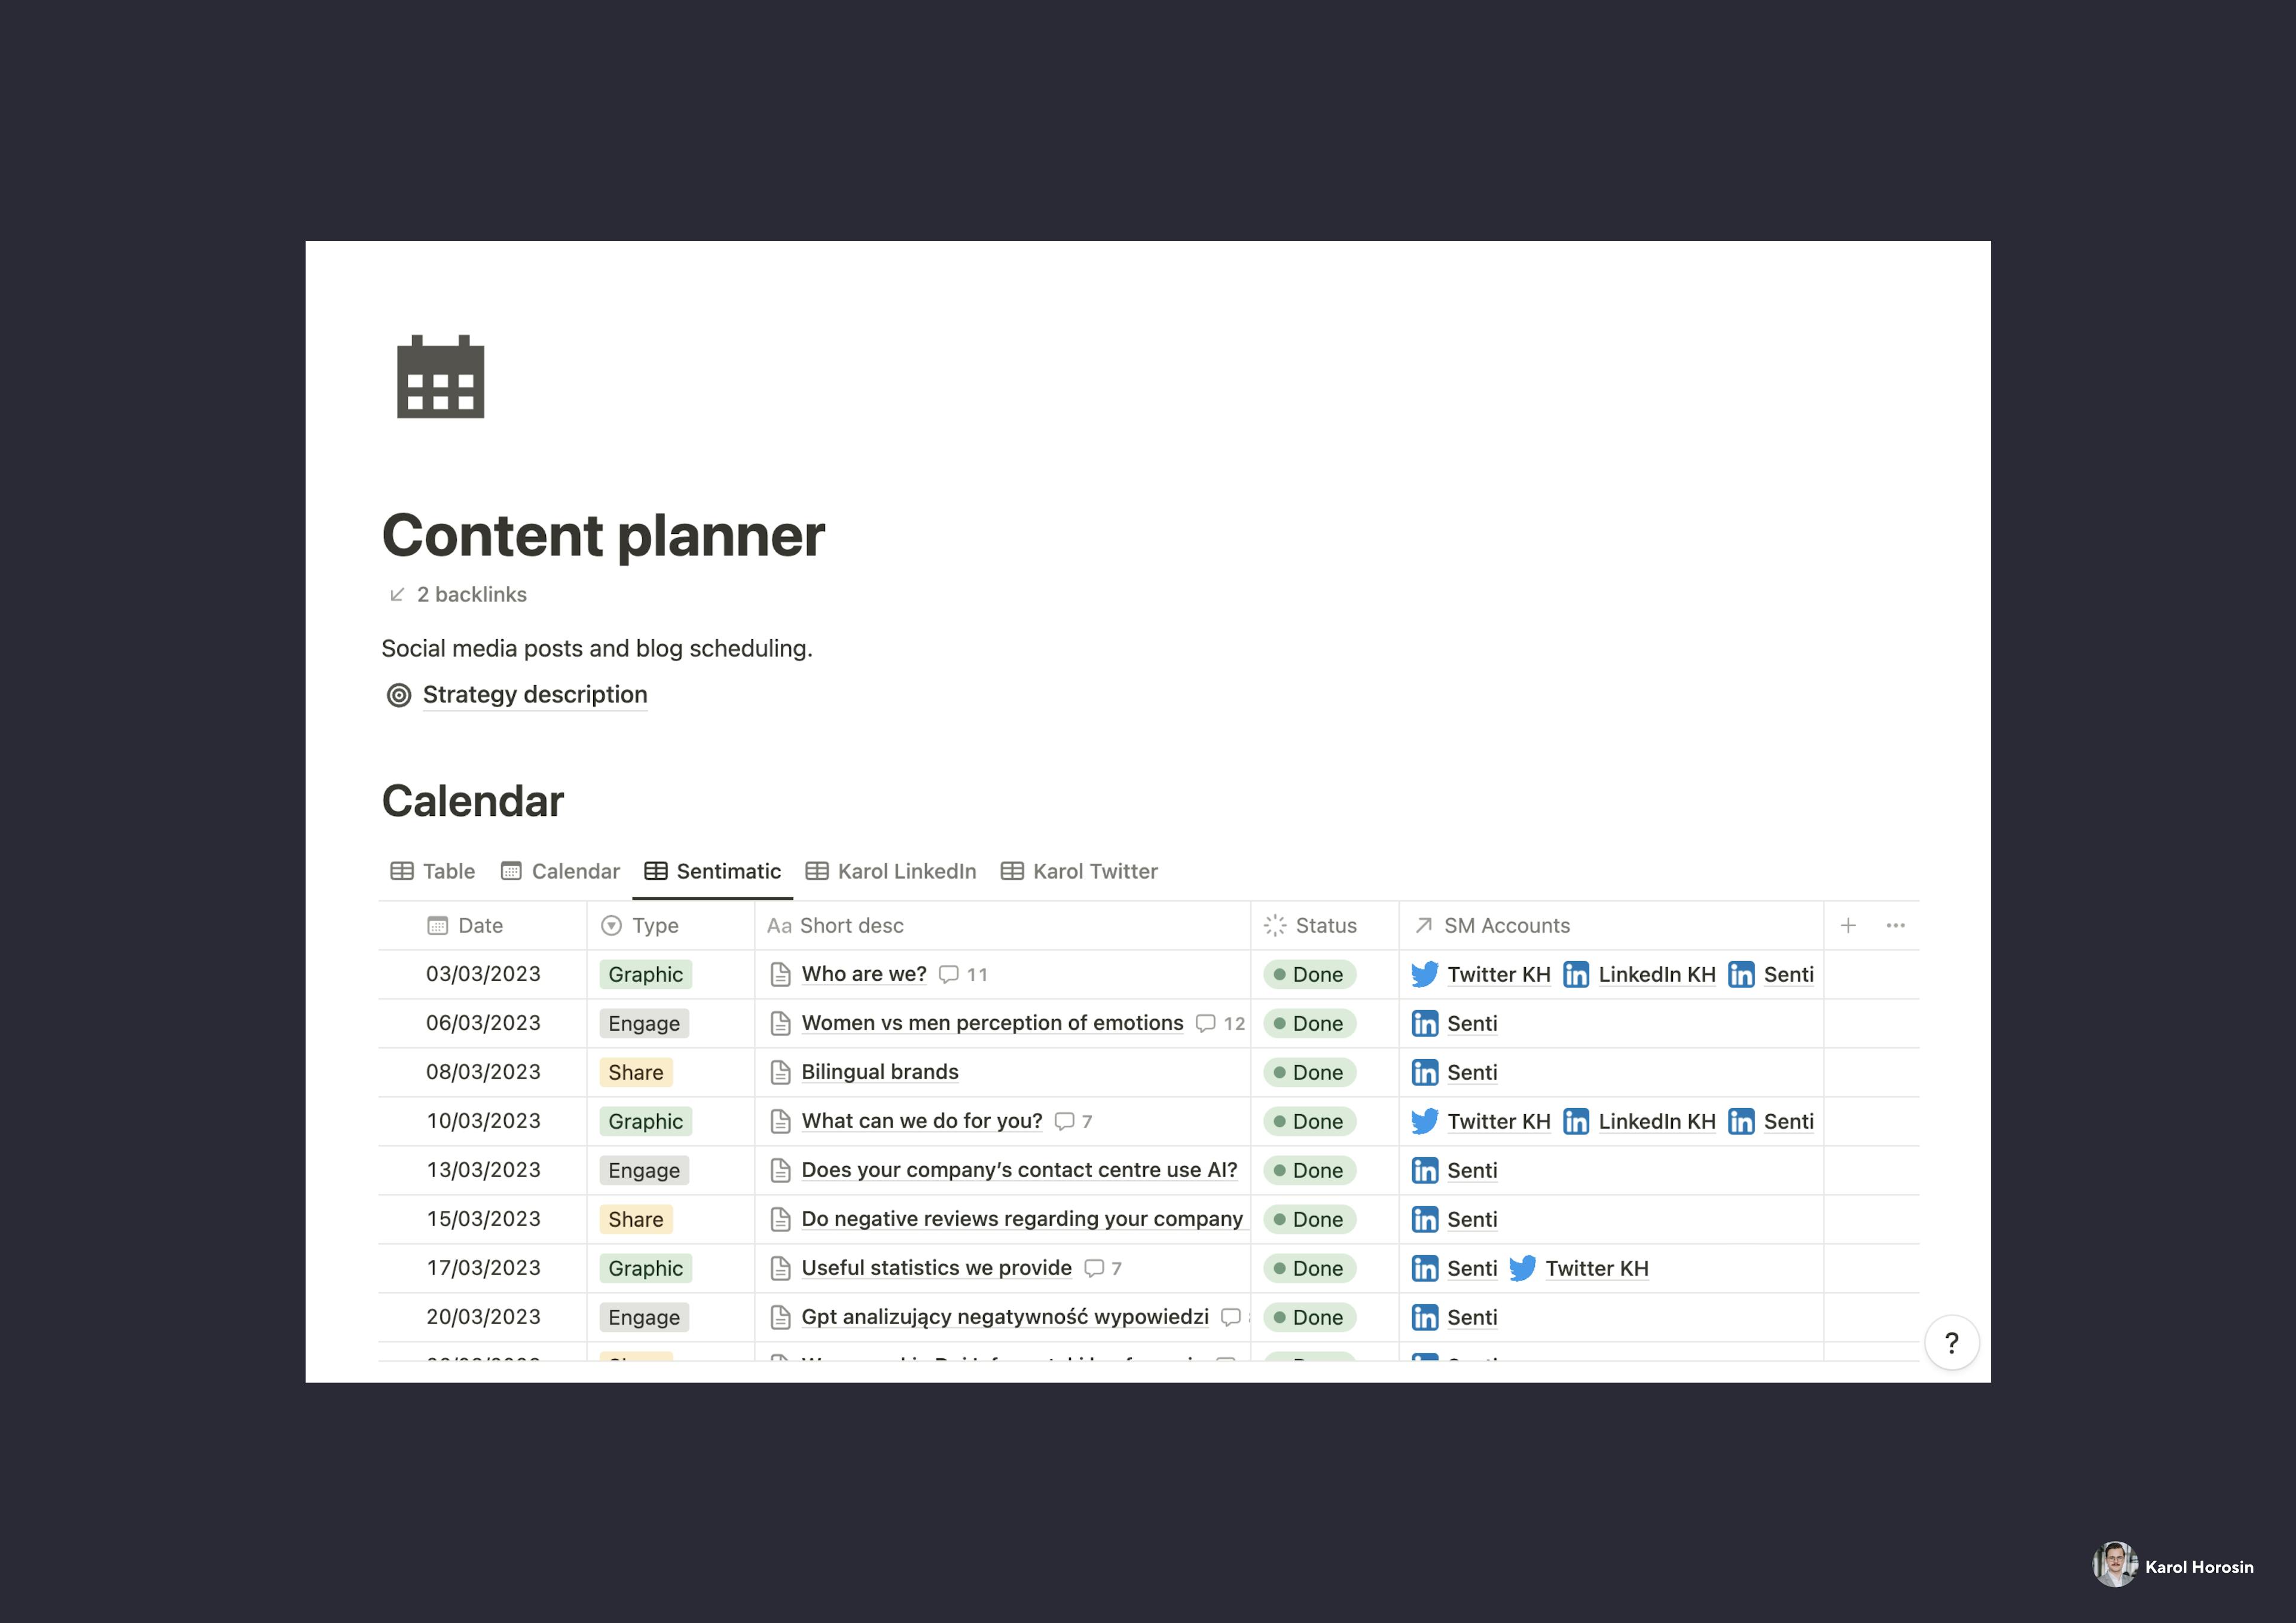 Content planner I created on Notion